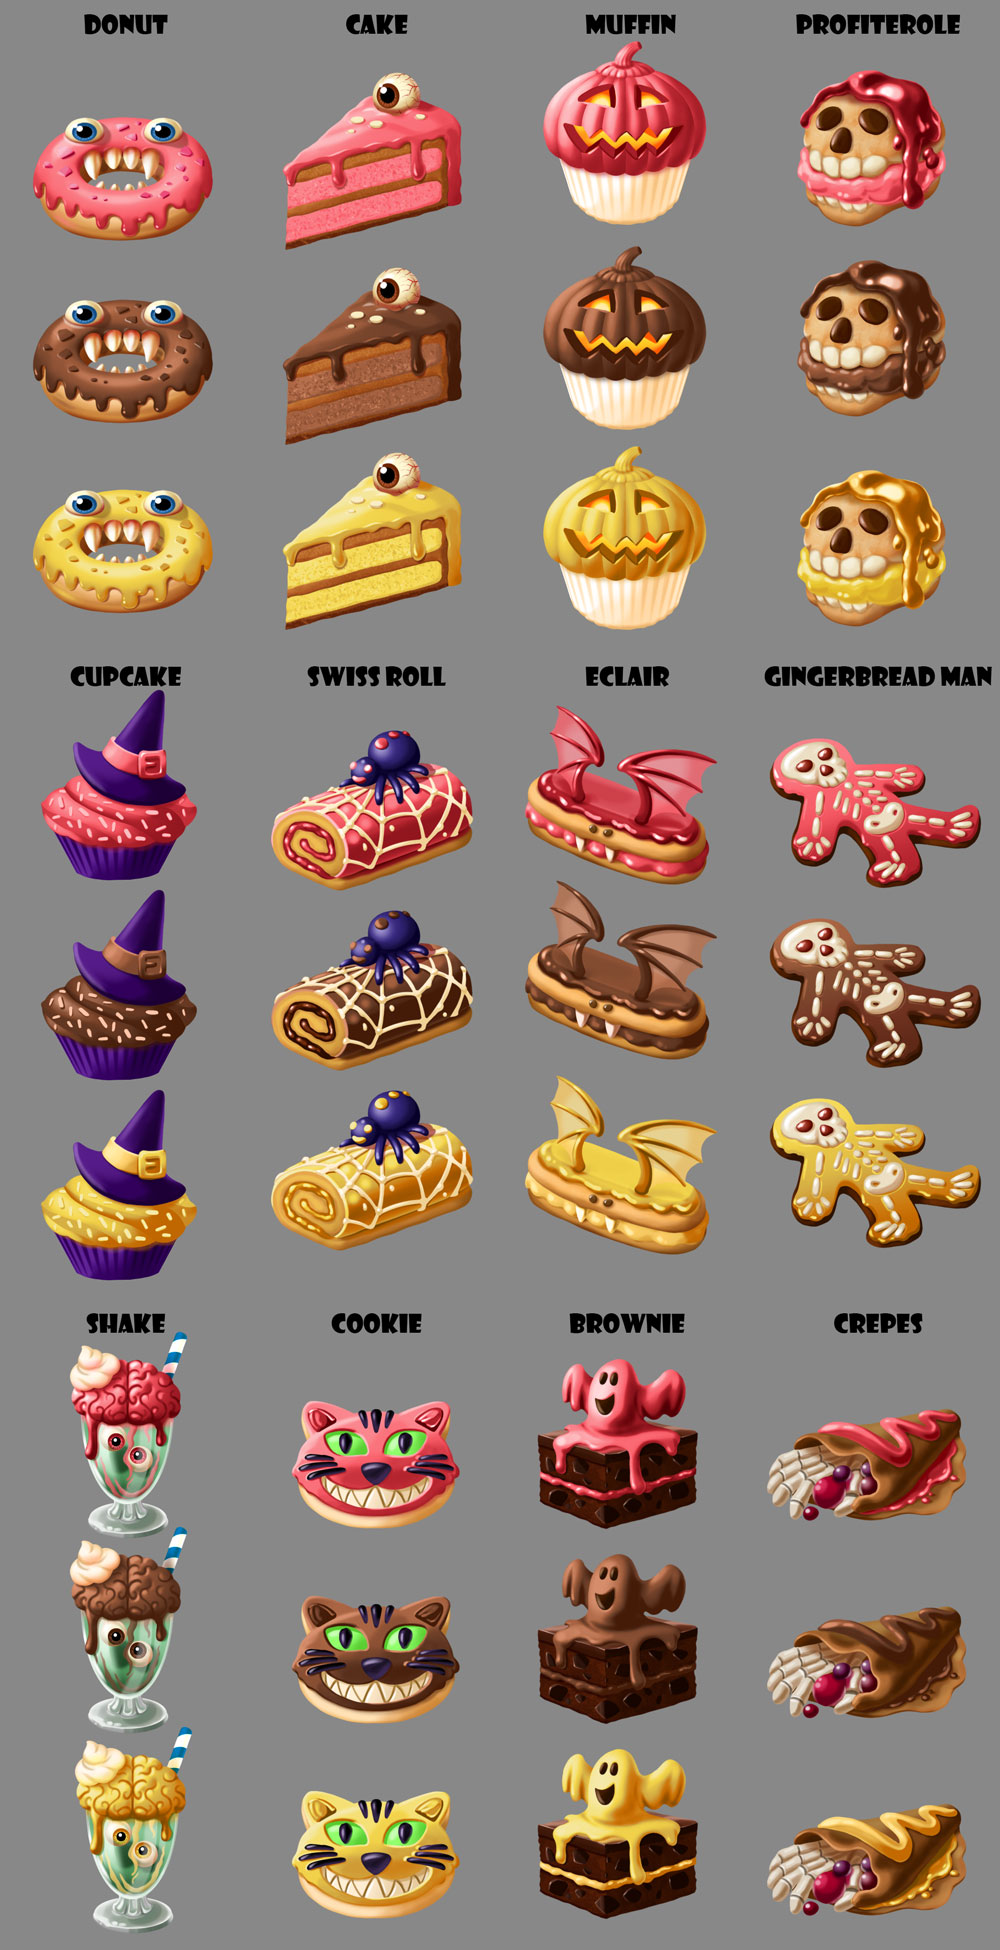 sweets_overview.jpg